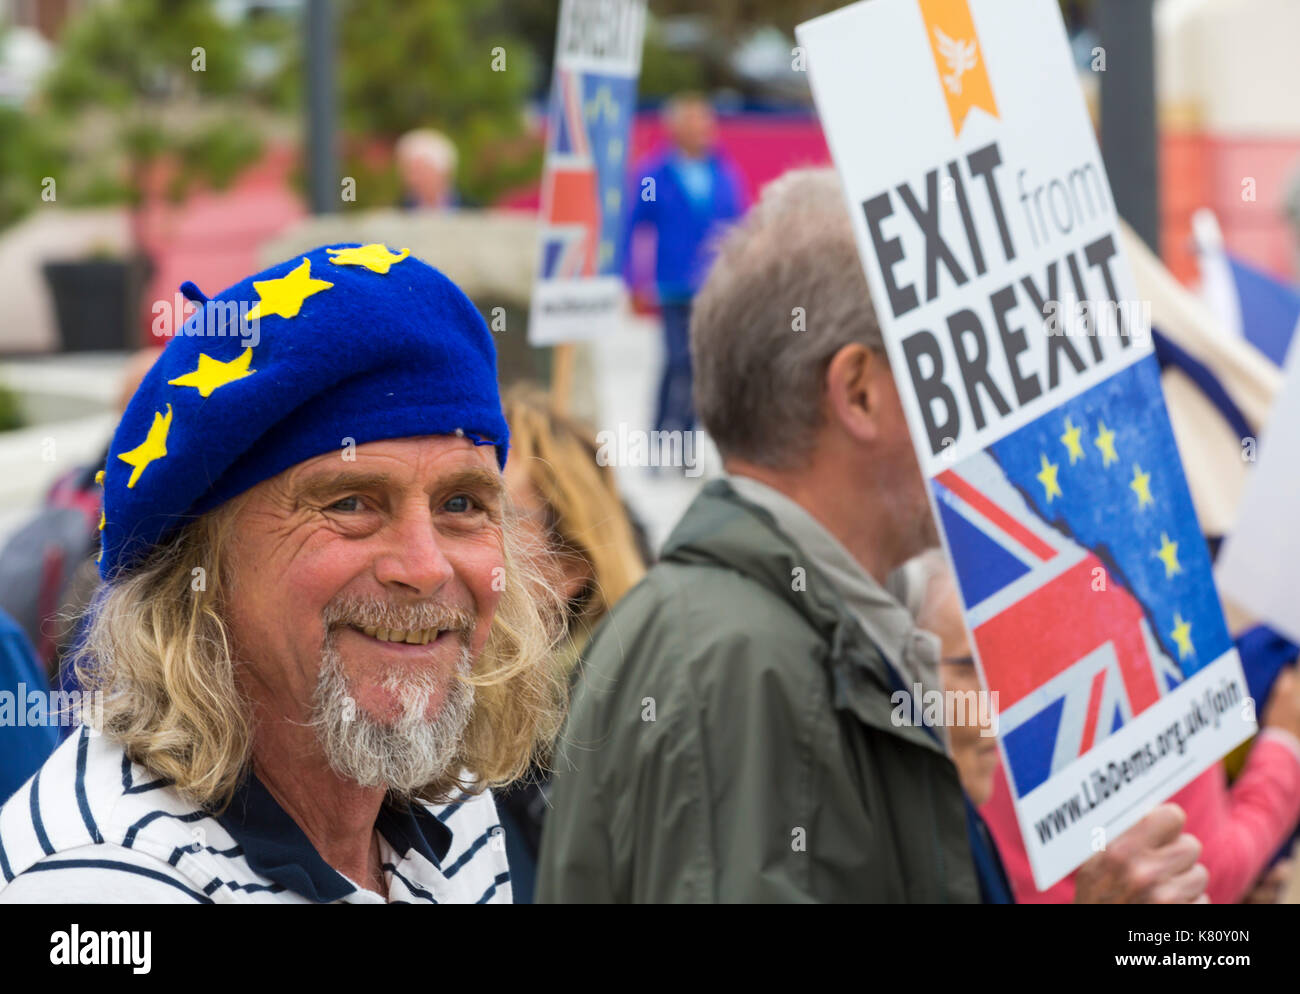 Bournemouth, Dorset, UK. 17th Sep, 2017. Stop Brexit Demonstration takes place to coincide with the Liberal Democrats Conference in Bournemouth. Mature man wearing EU beret next to Exit from Brexit placard. Credit: Carolyn Jenkins/Alamy Live News Stock Photo